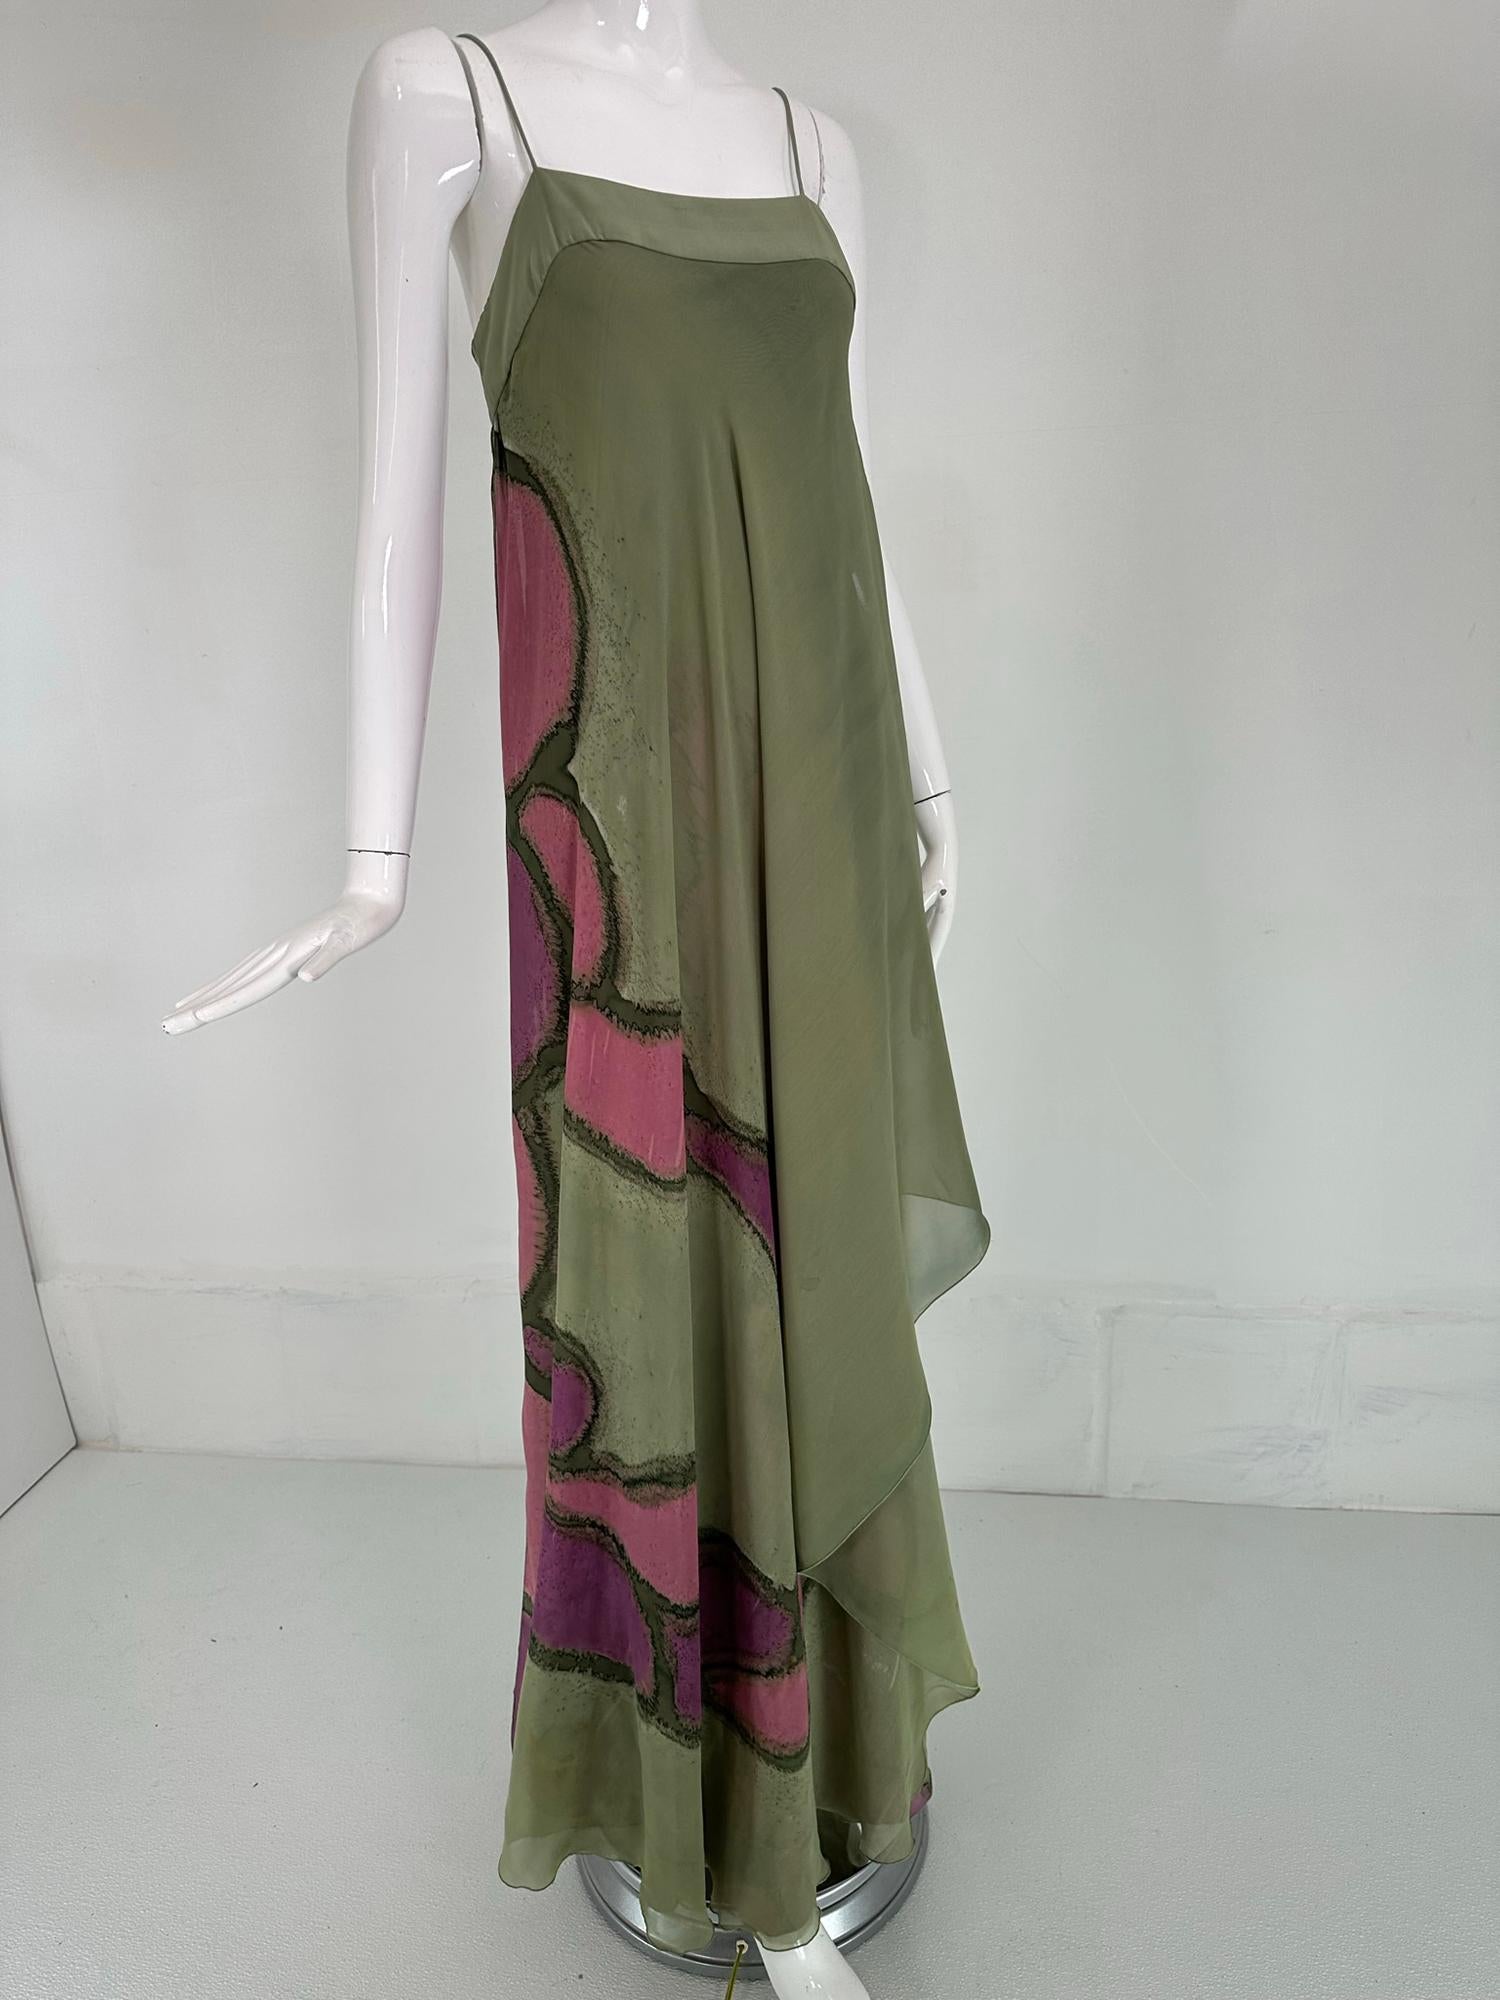 Mursan, New York-Paris hand painted silk chiffon satin bias cut gown from the 1970s. Satin bandeau bodice with spaghetti straps, floating painted chiffon panels front and back are open at the sides and fall to a shaped hem. The painted satin under